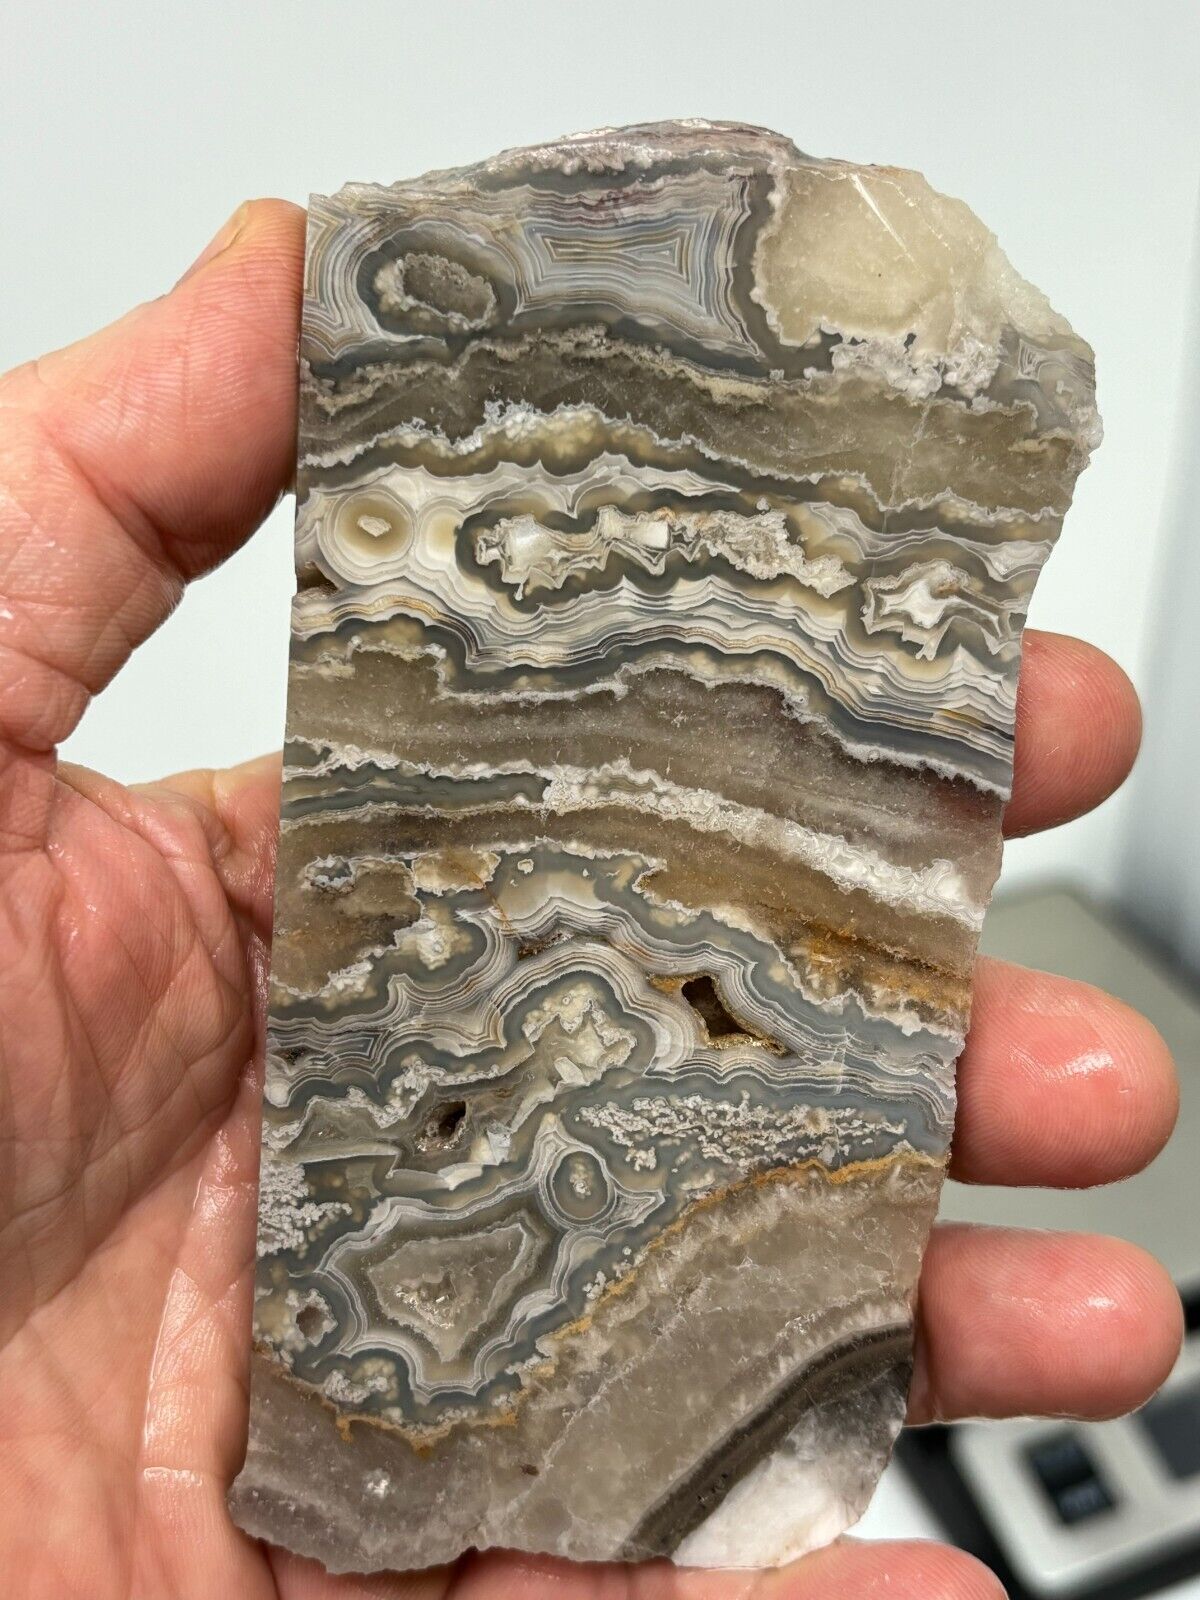 Mexican Laguna Crazy Lace Agate Slab Cabbing Collecting Combo Ship Avail